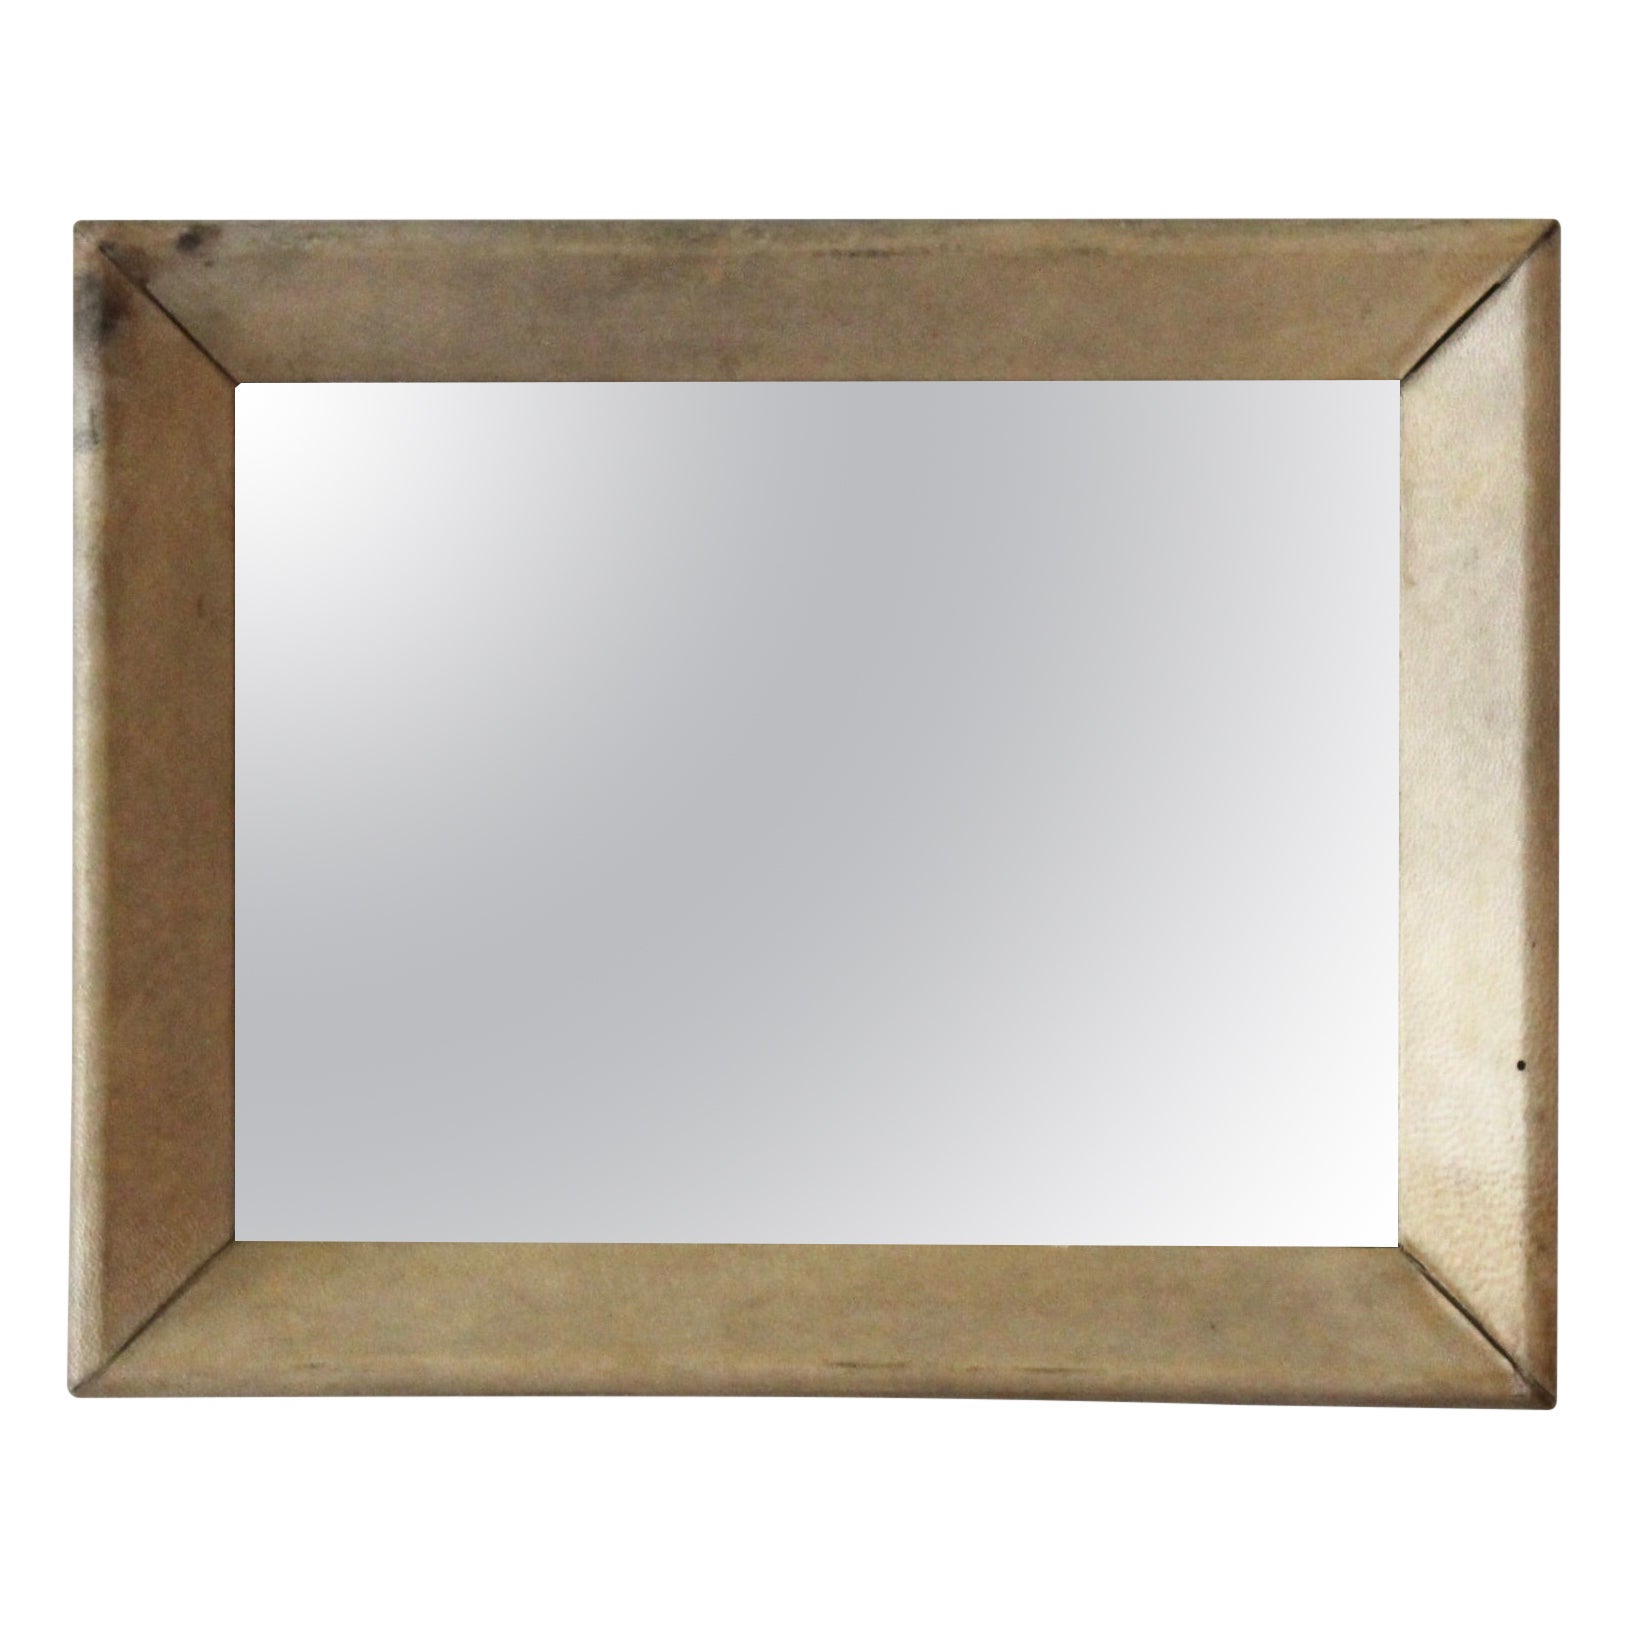 Italian Designer, Wall Mirror, Beige-Painted Leather, Wood, Italy, 1930s For Sale